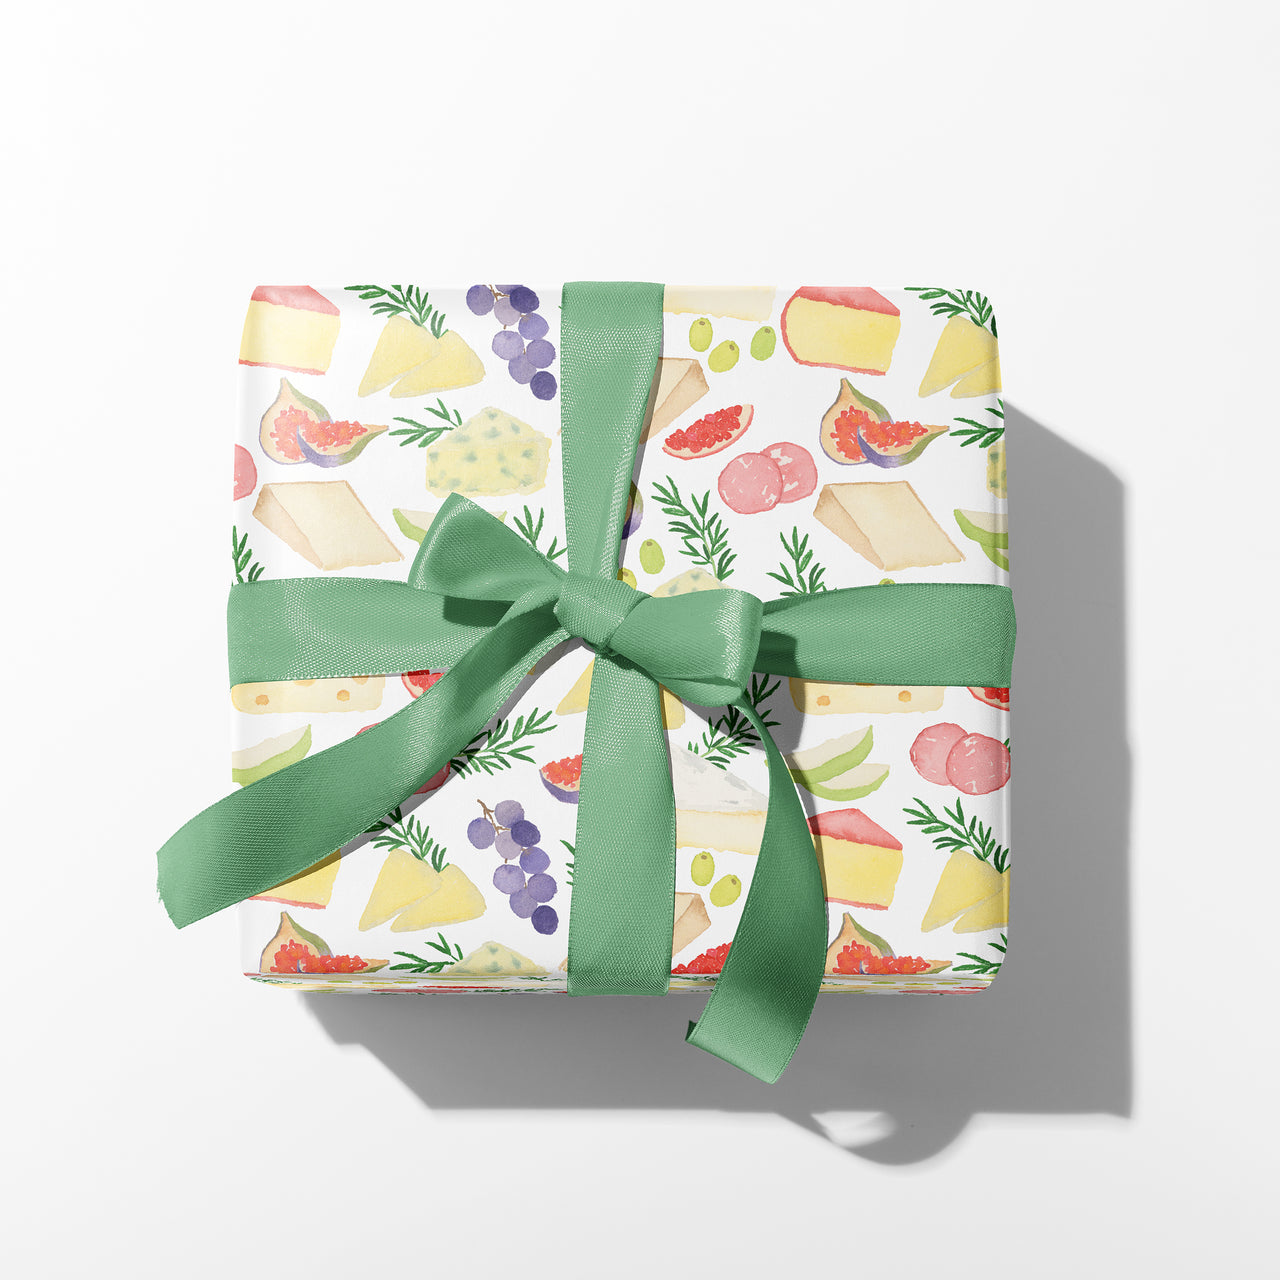 Cheese Gift Wrap by Gert & Co